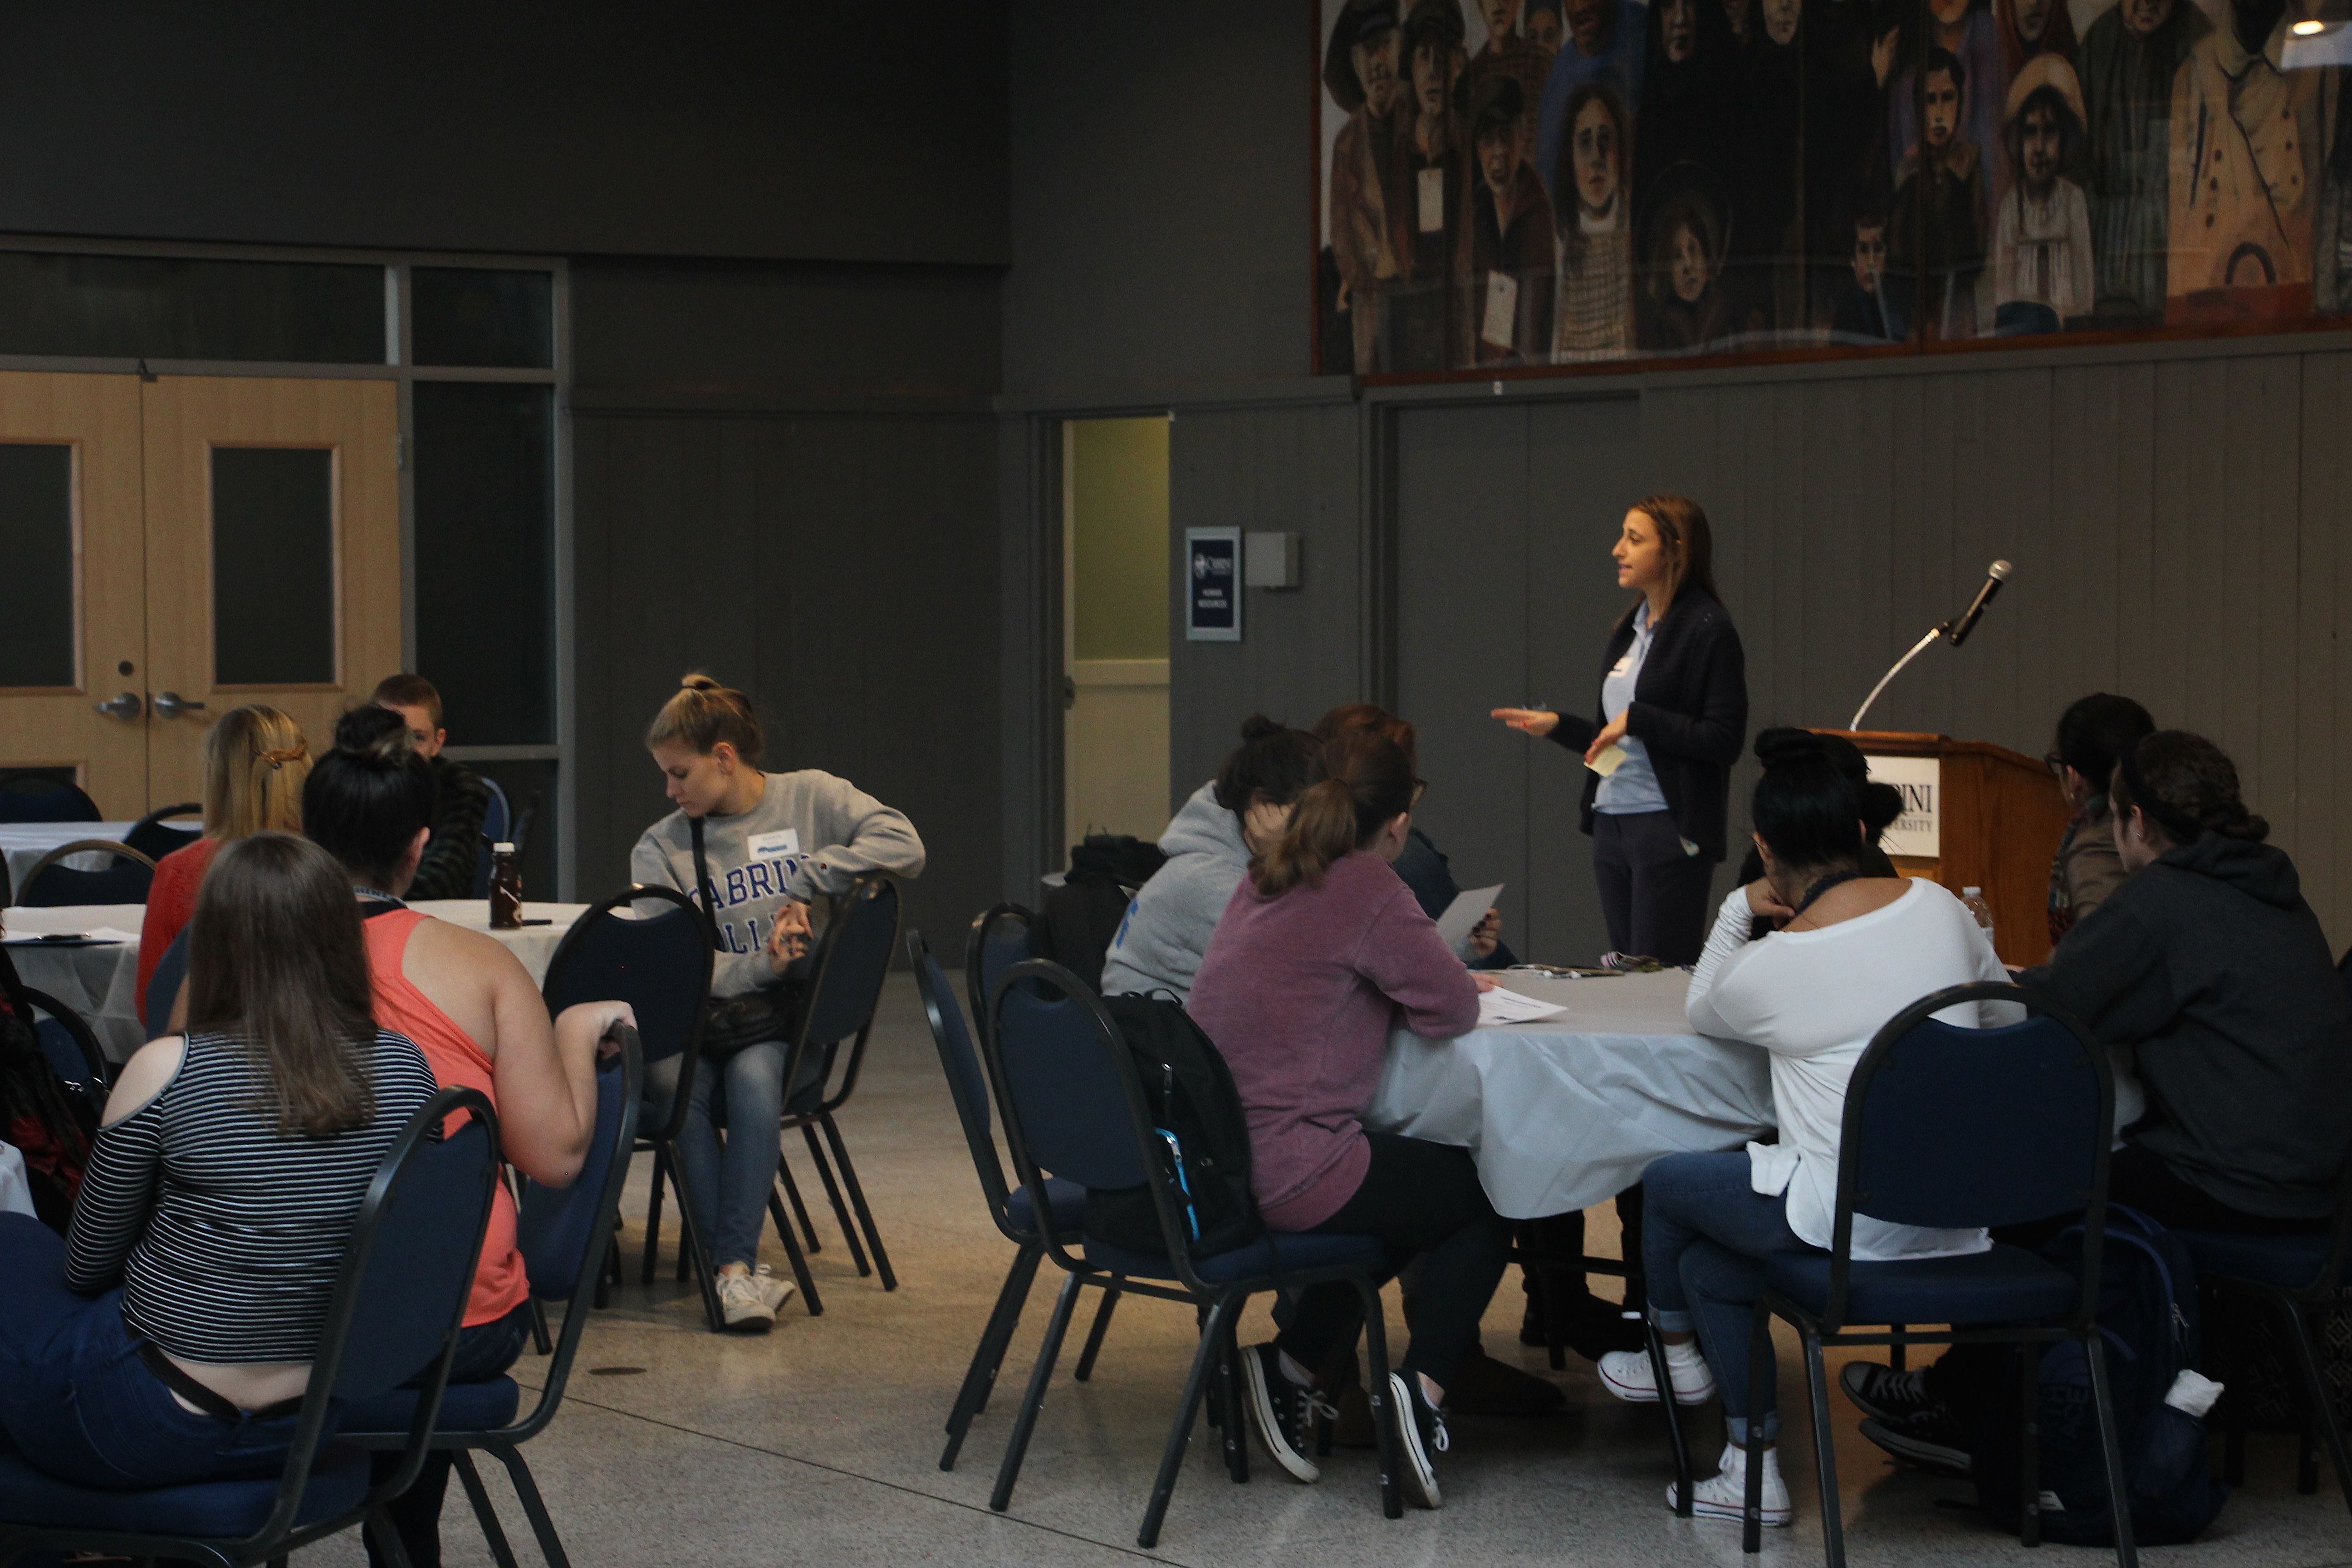 Students listen in on successful tips for leadership roles. Photo by Nina Schirmer